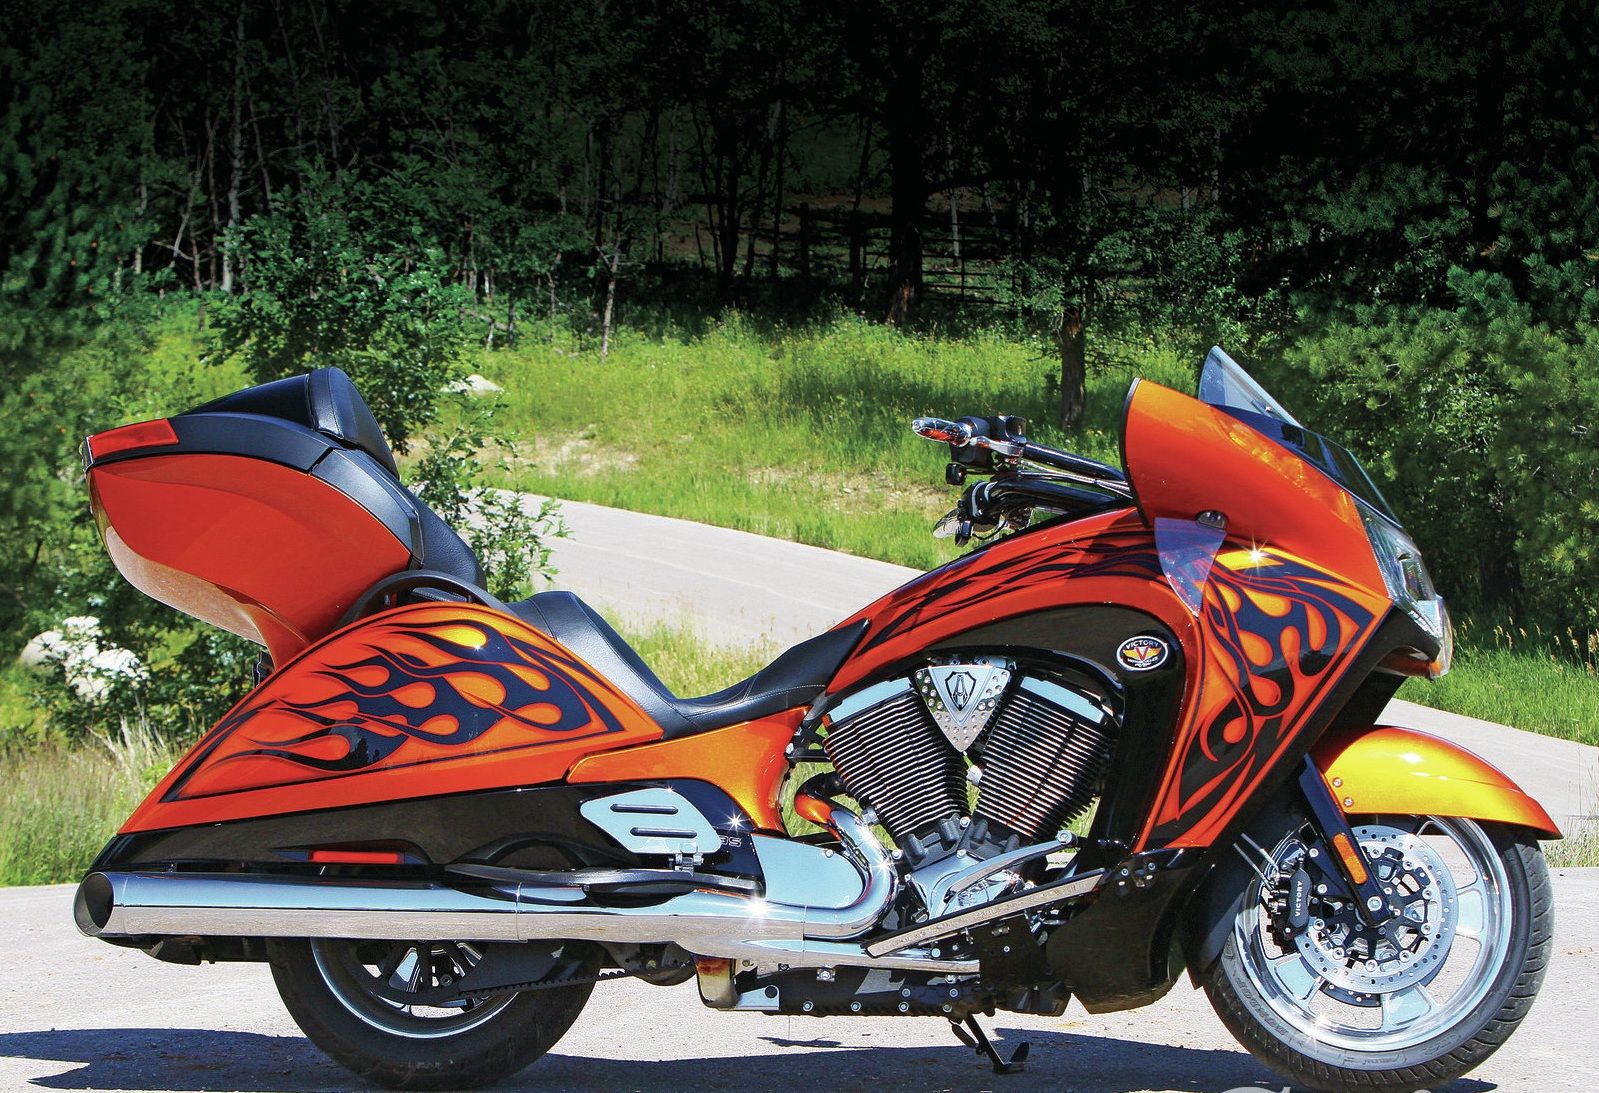 2012 Victory Arlen Ness Vision